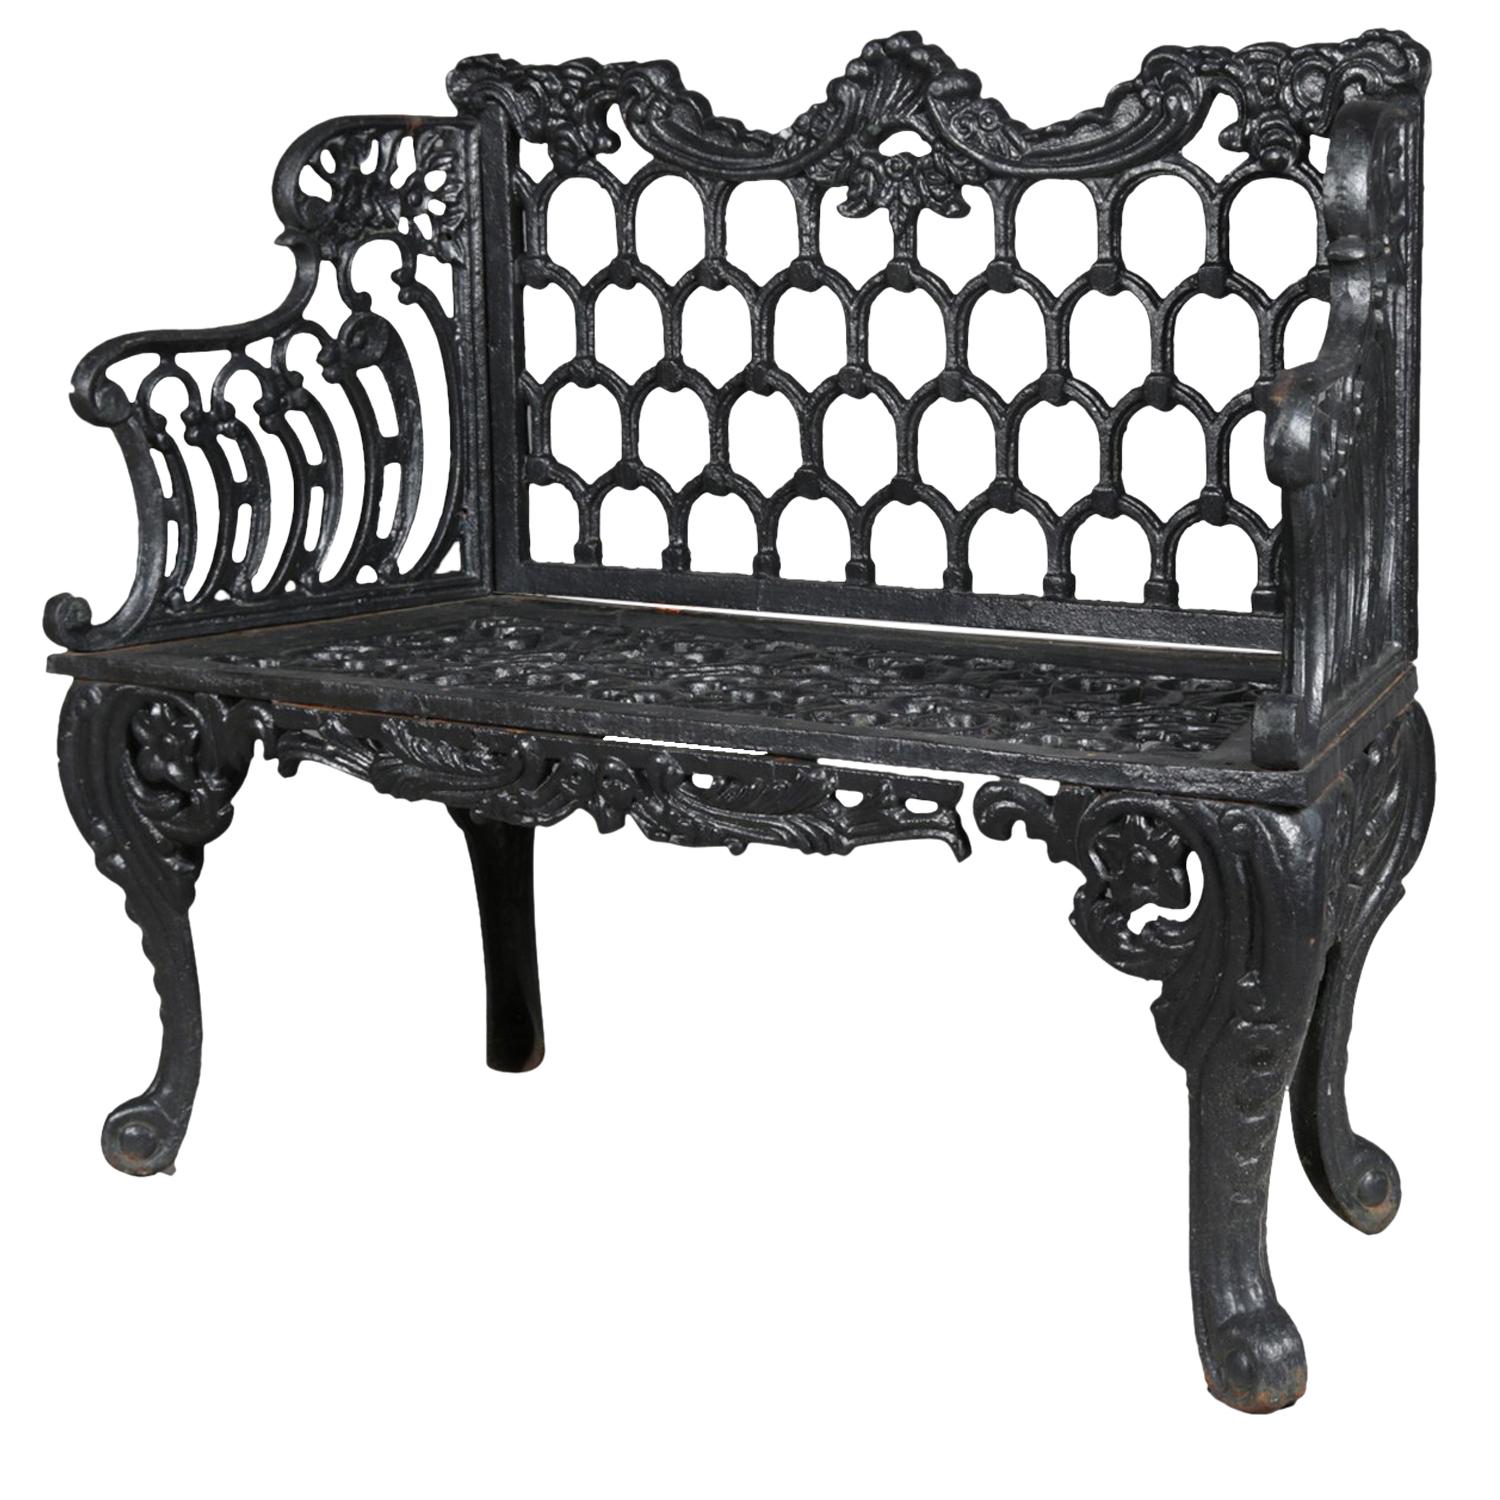 Rococo Revival Painted Cast Iron "Rose Garden Bench" by Kramer Bros